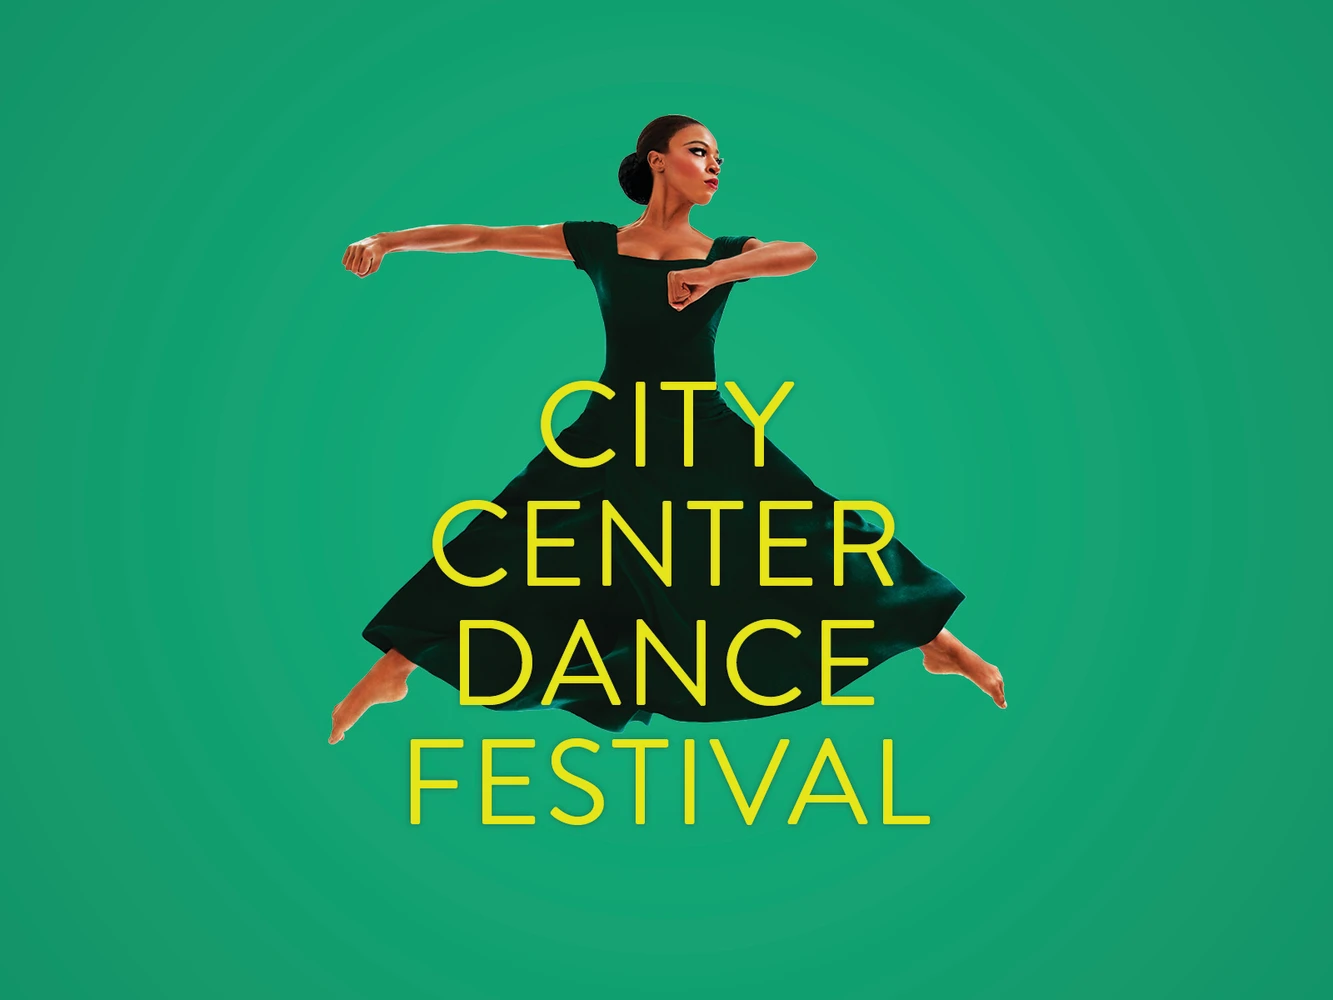 City Center Dance Festival: What to expect - 1